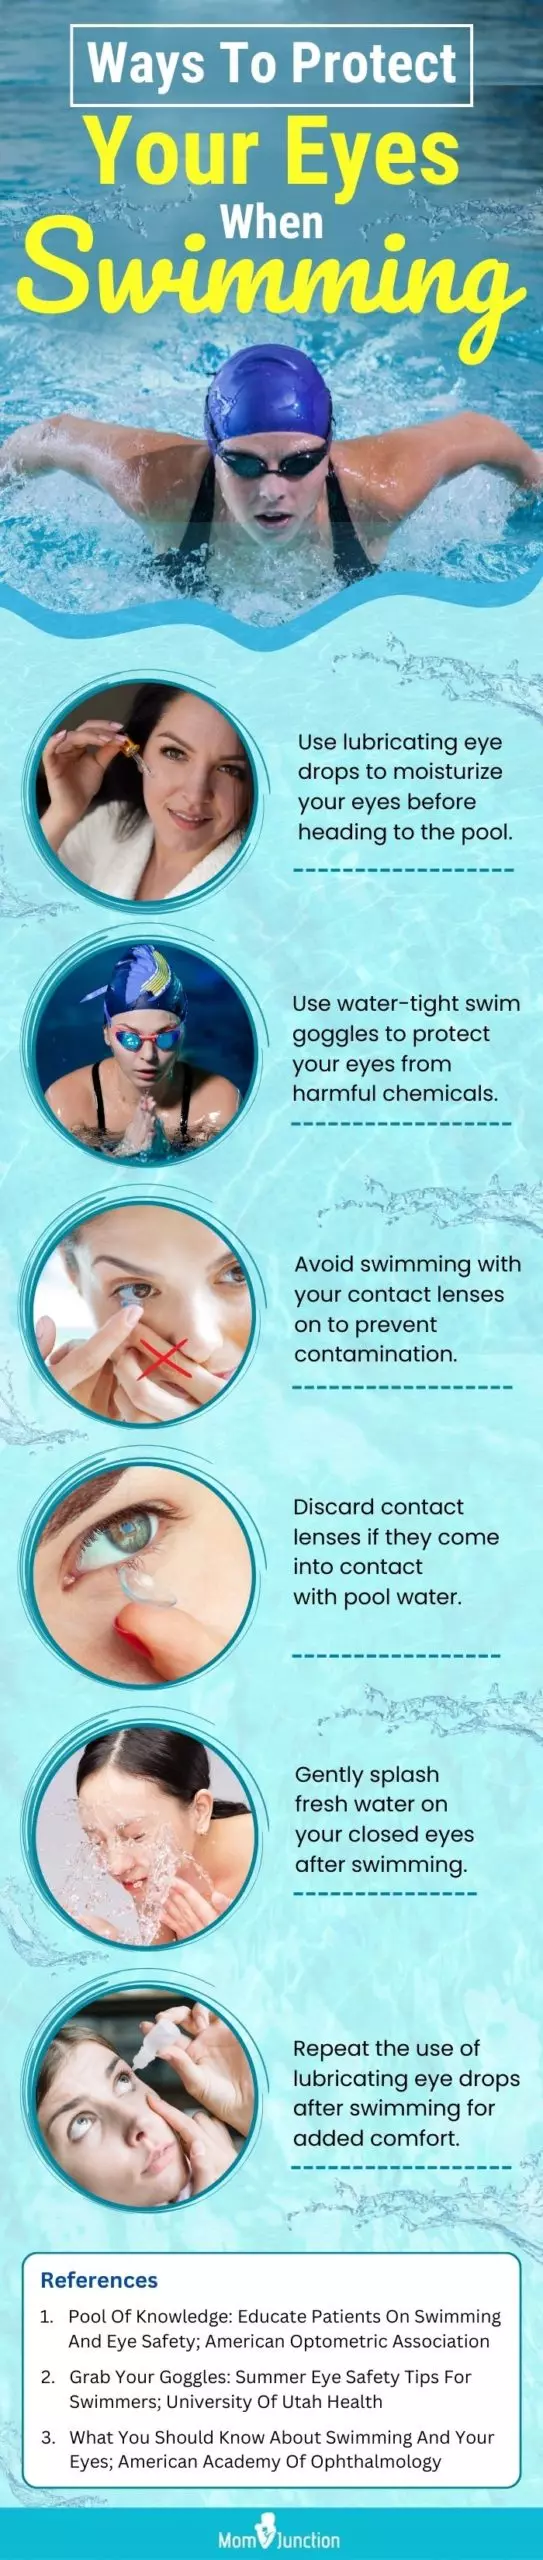 Ways To Protect Your Eyes When Swimming (infographic)